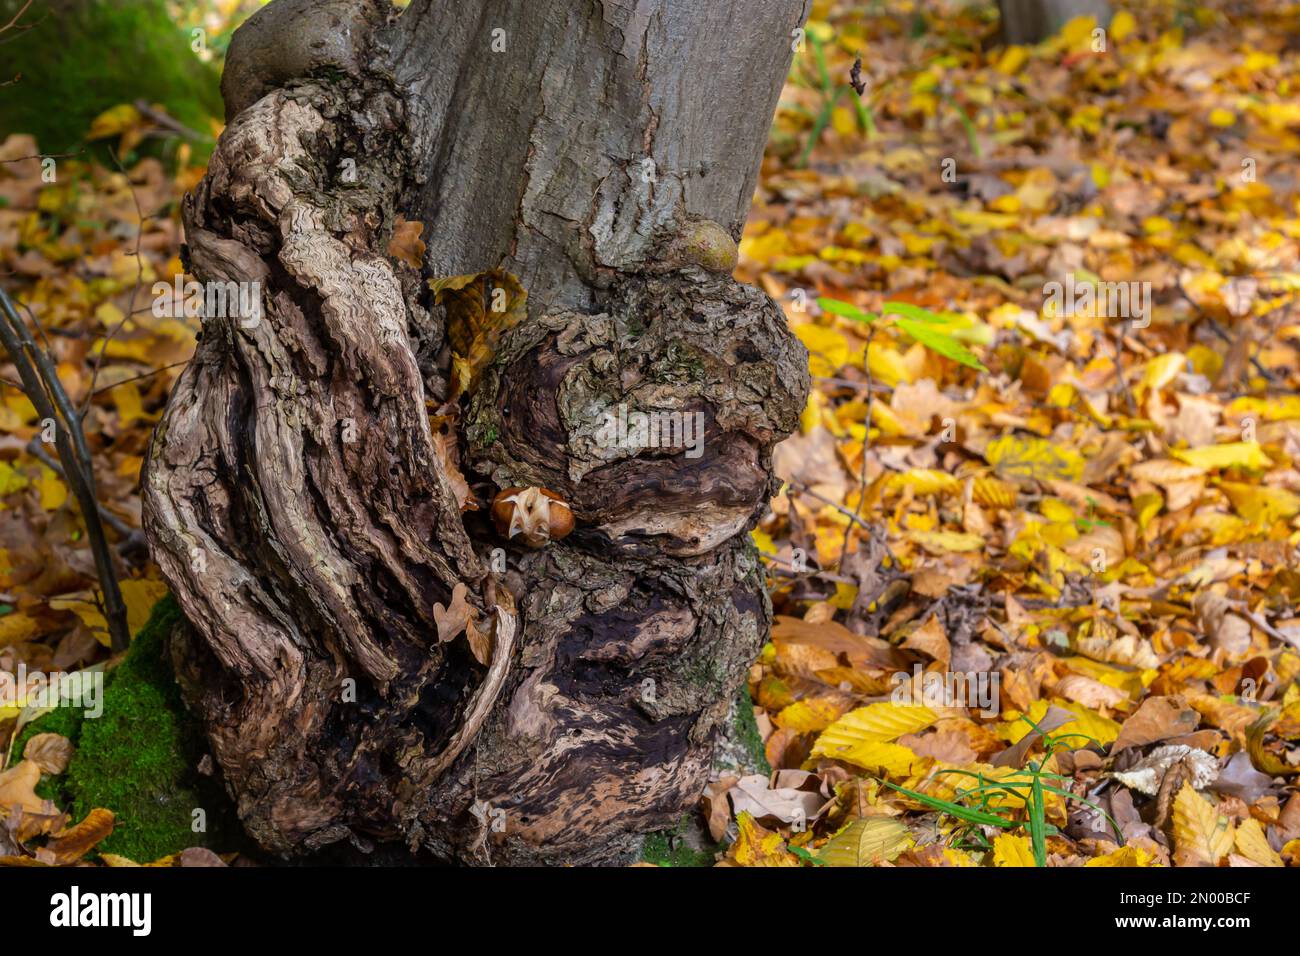 The form of plant disease on the trunk. This proliferation on the main stem has been growing for several years. Stock Photo